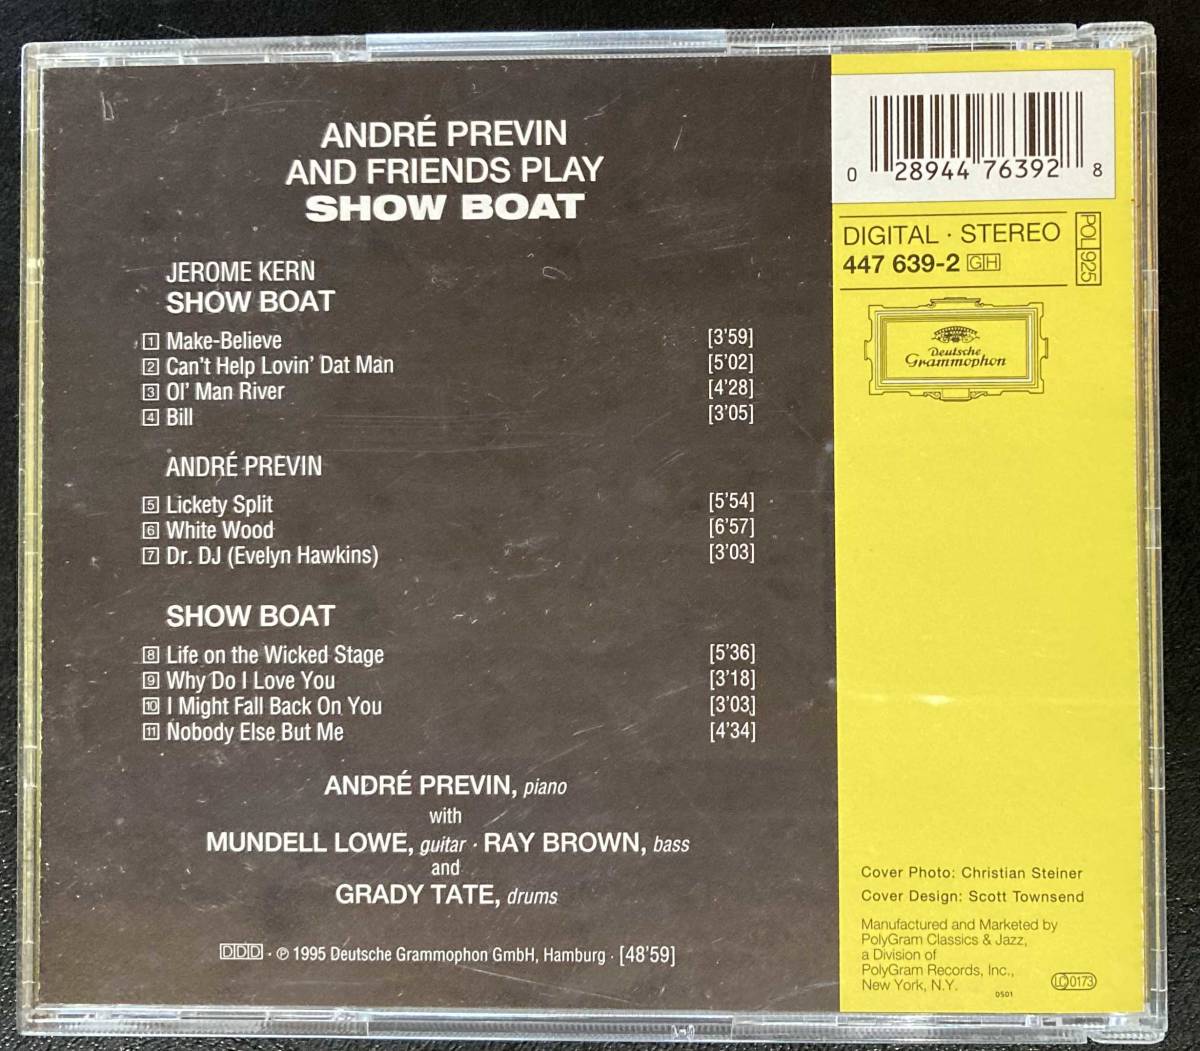 Andre Previn and Friends Play Show Boat / Andre Previn 中古CD　USA盤_画像3